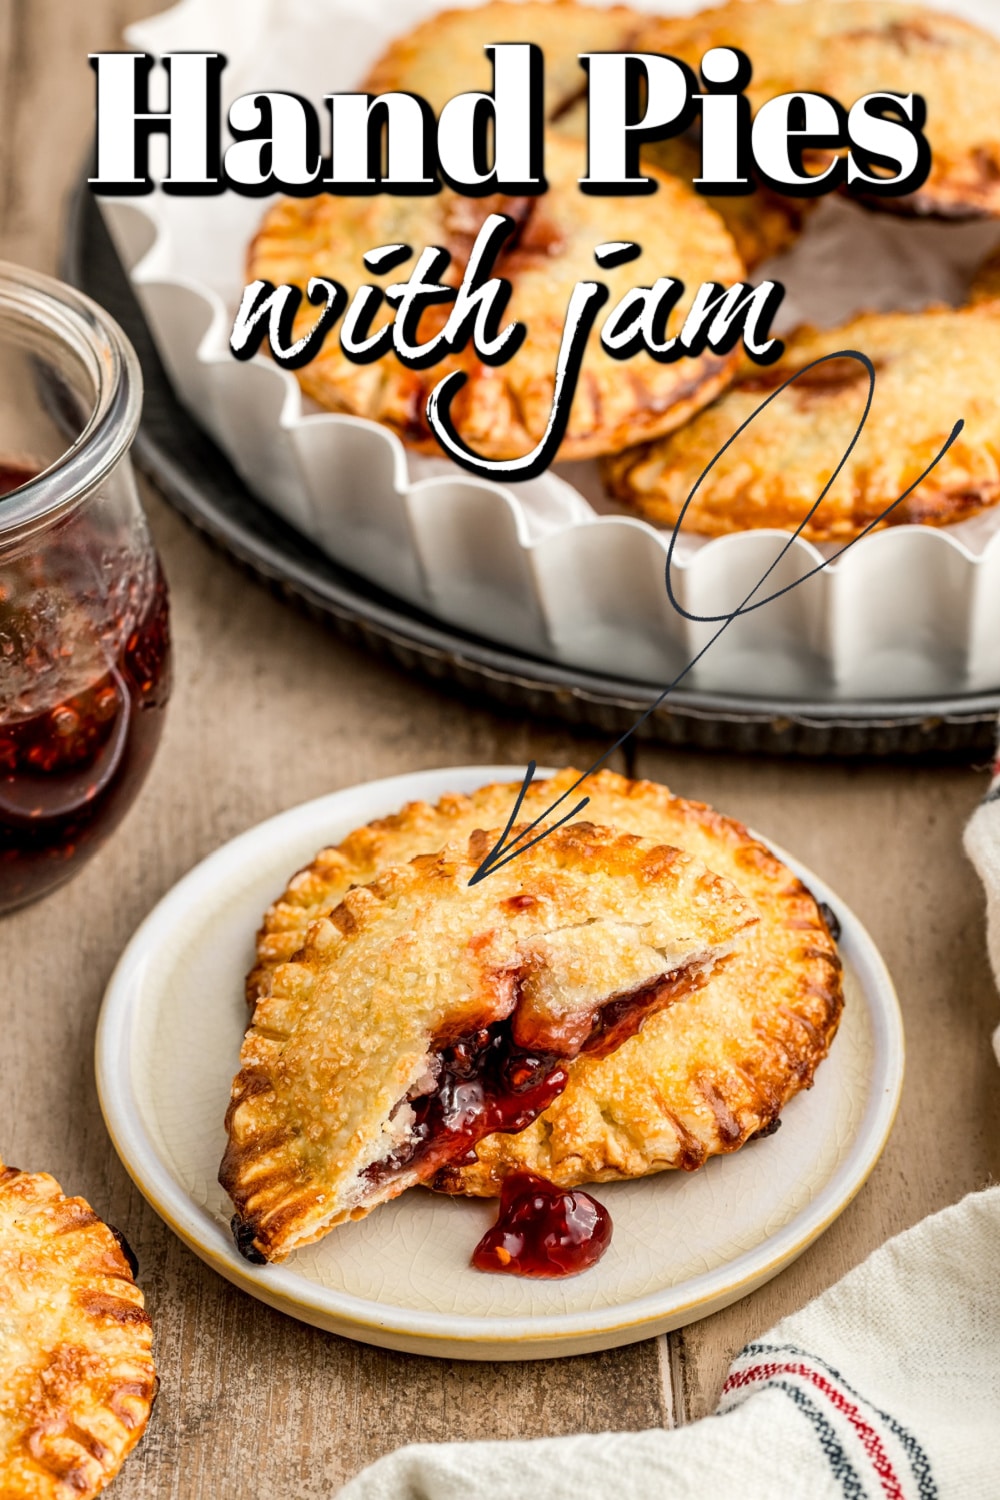 Hand Pies with Jam Pin. 